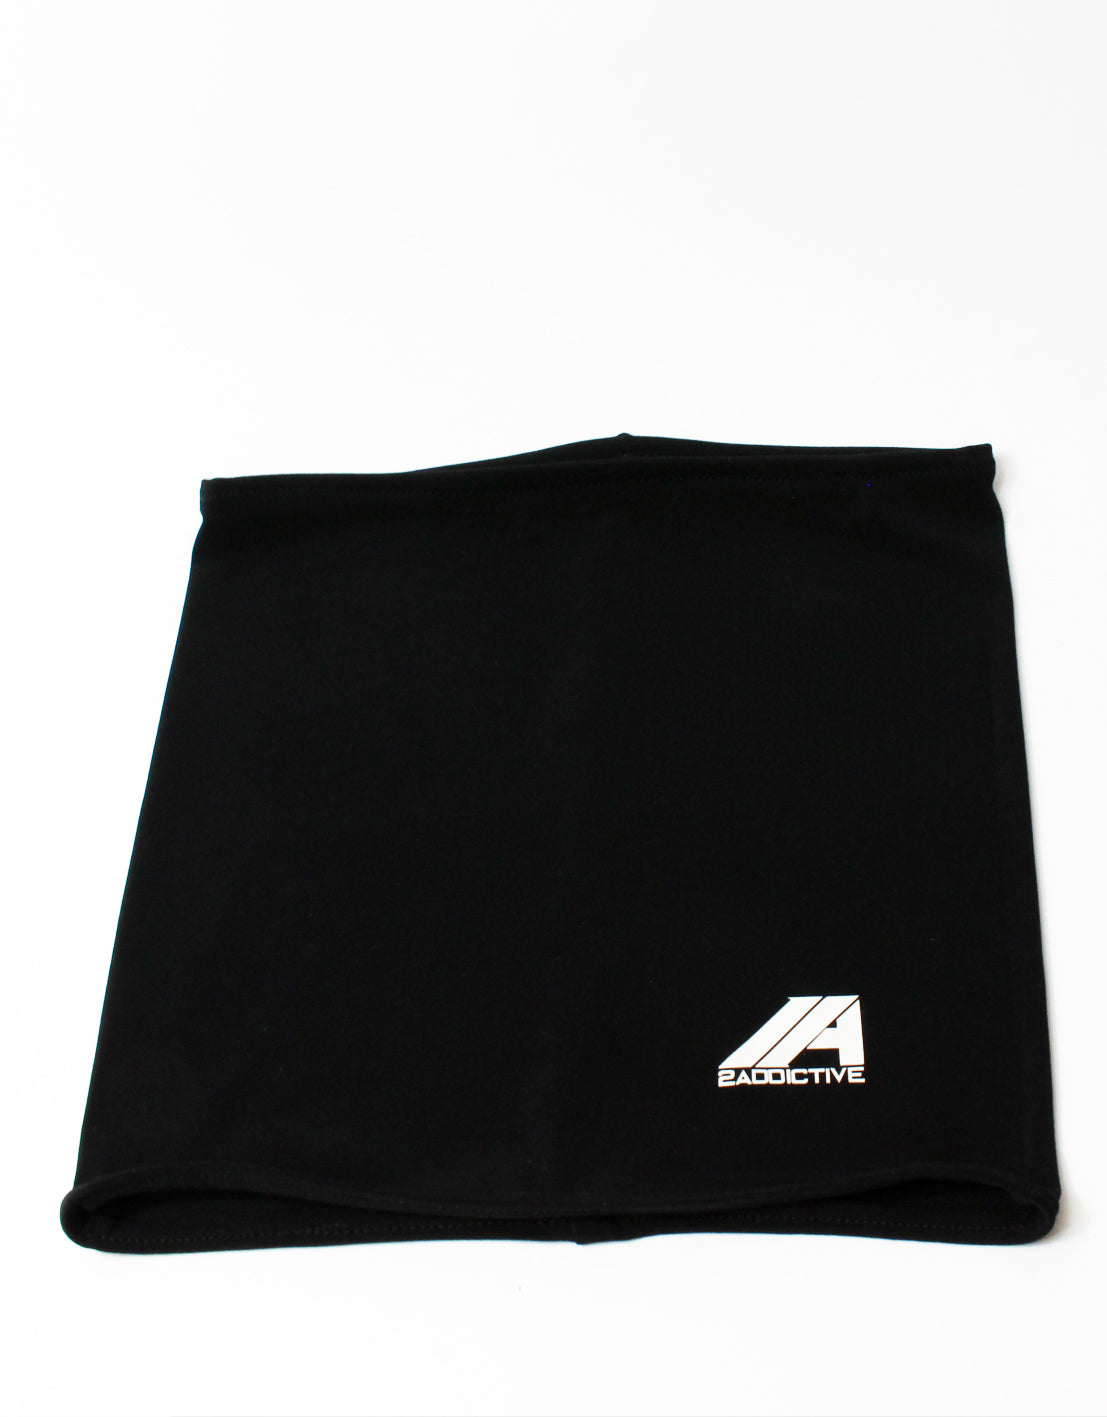 NEW Light Weight Neck Warmer/ Face covering  - Black - 2 Addictive